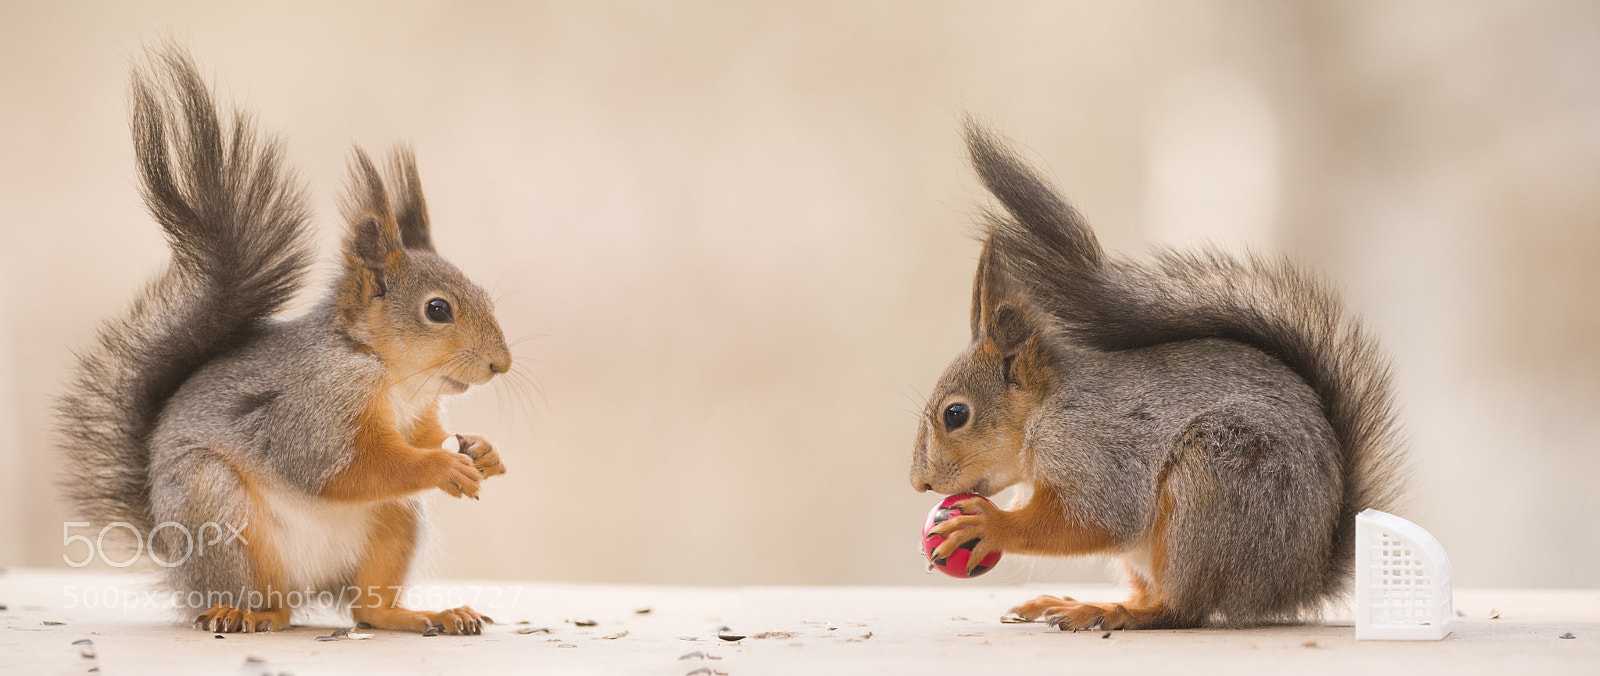 Nikon D810 sample photo. Two red squirrels with photography